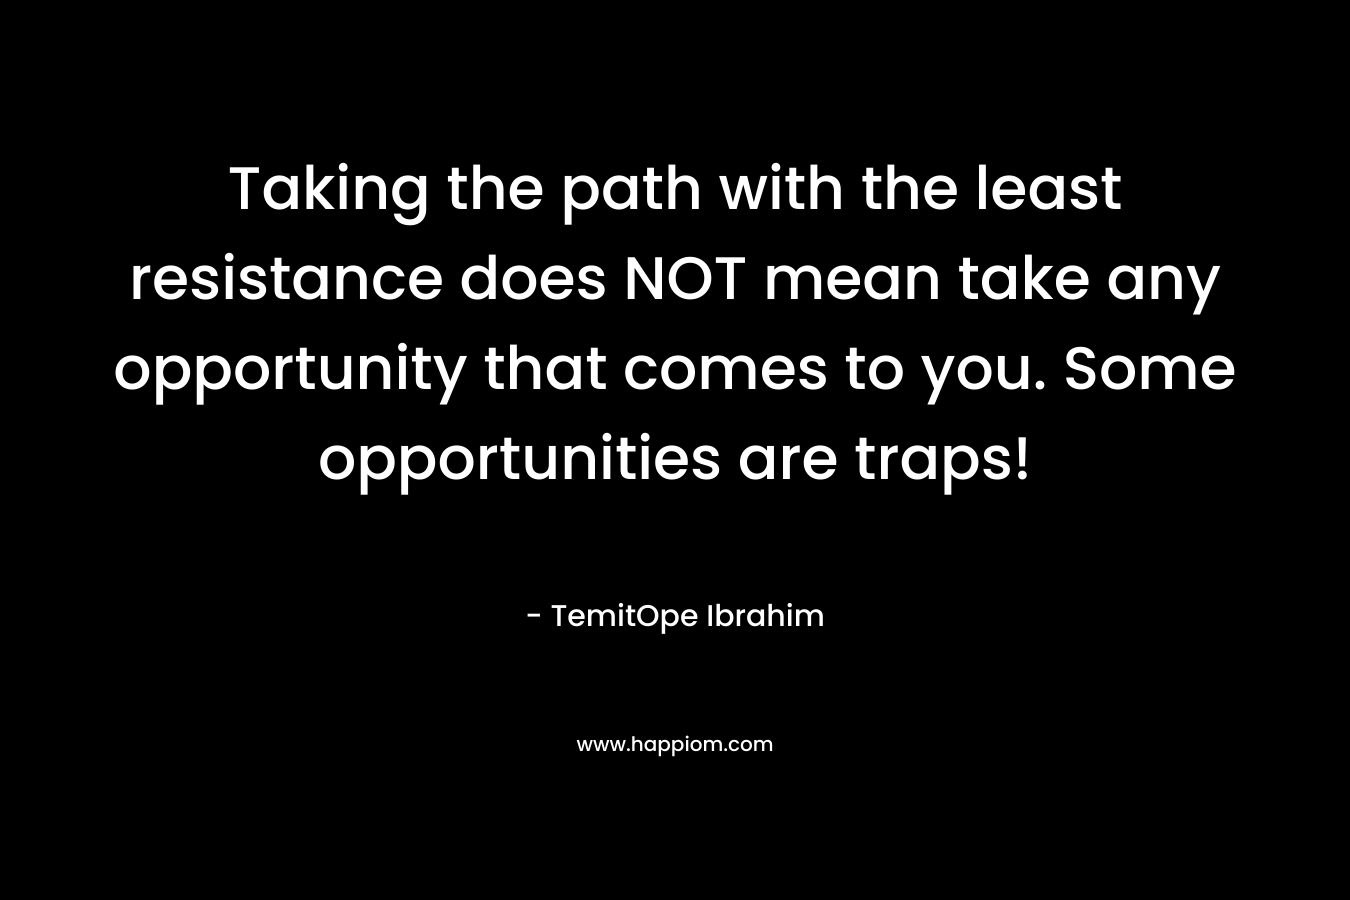 Taking the path with the least resistance does NOT mean take any opportunity that comes to you. Some opportunities are traps!